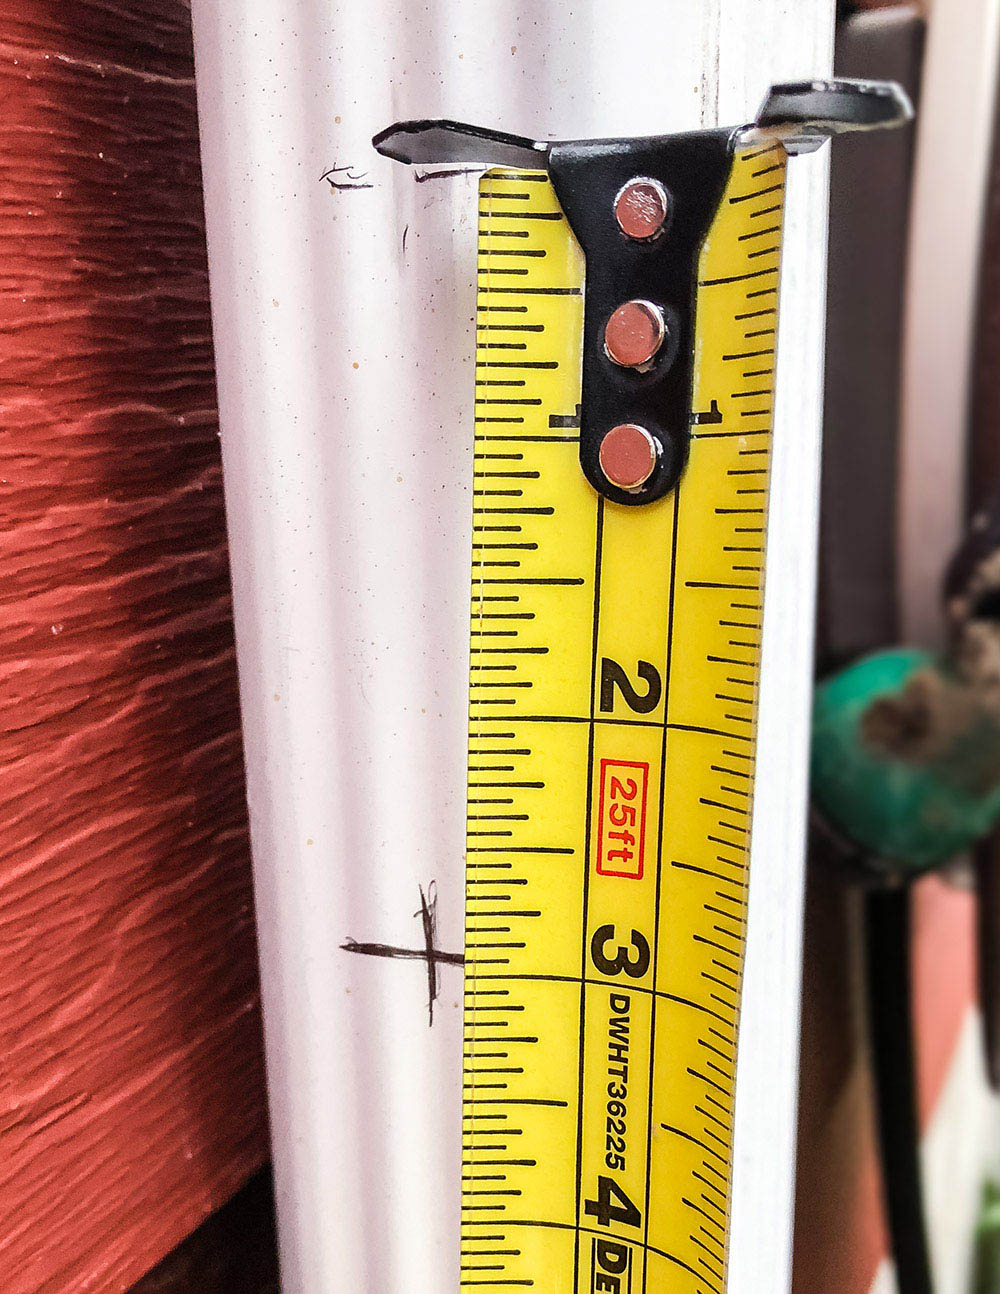 A downspout marked with pencil at 3 inches on a tape measure.